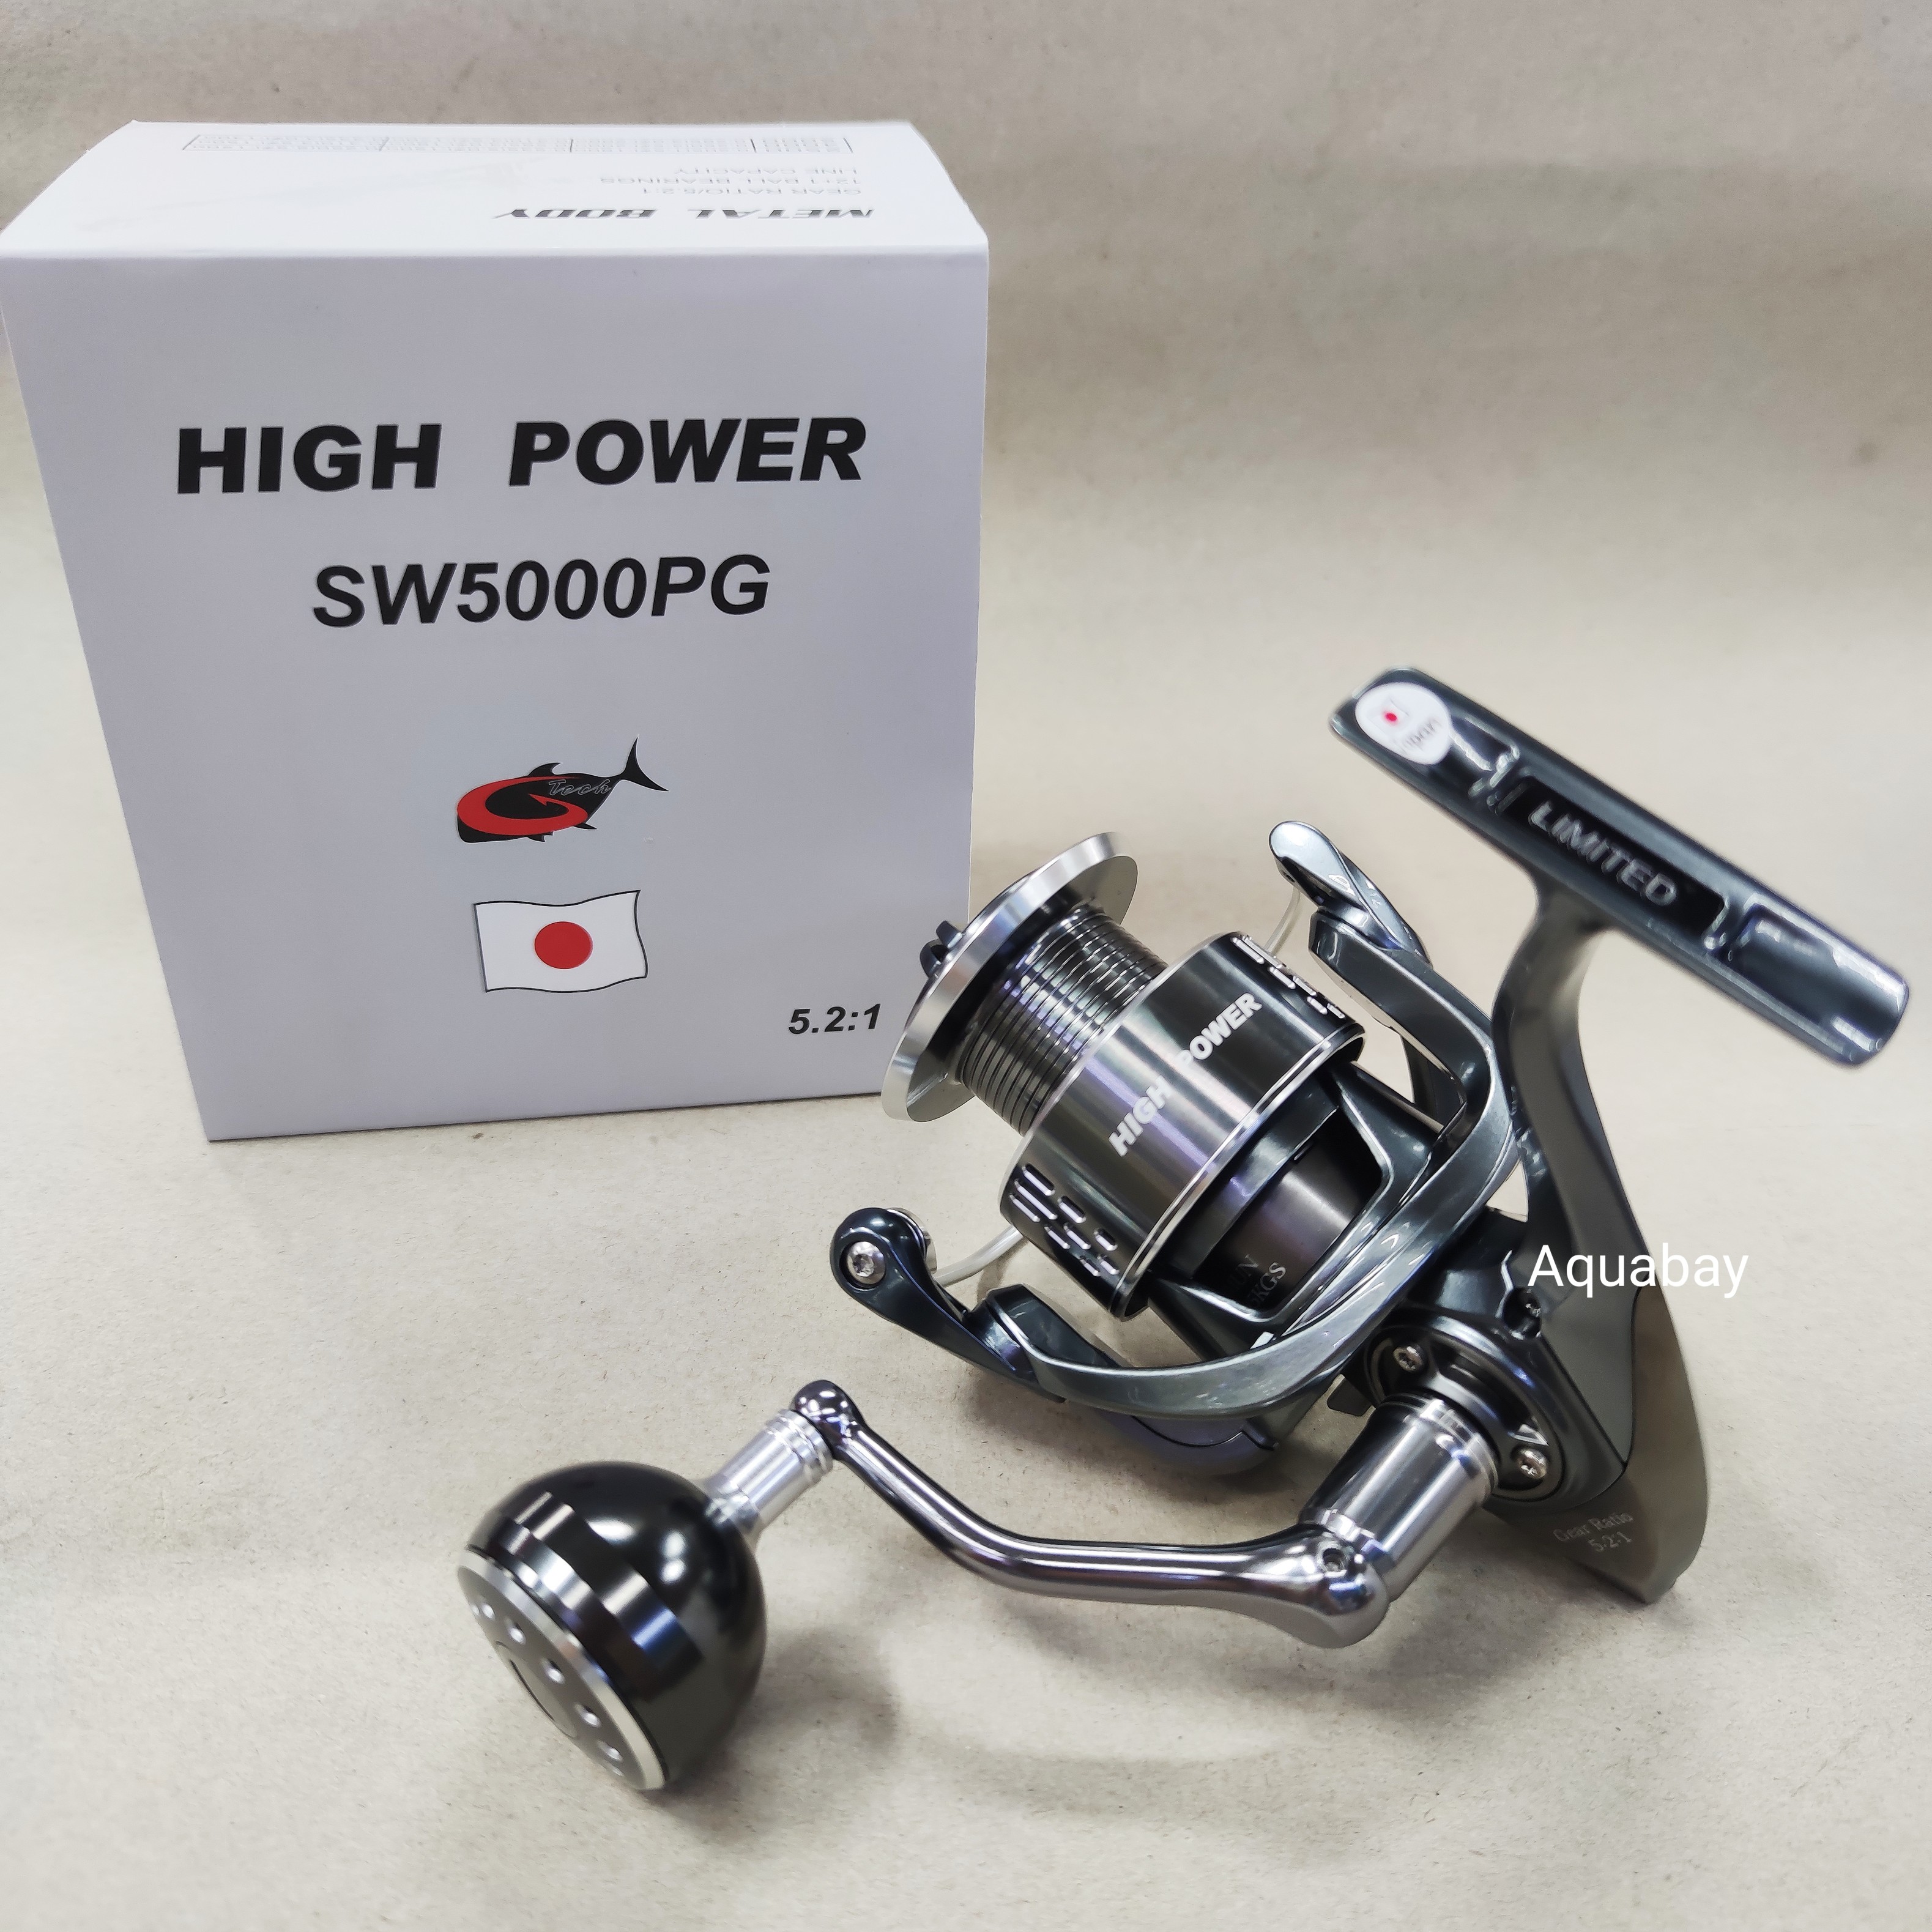 GTECH HIGH POWER SW4000PG / SW5000PG FISHING SPINNING REEL